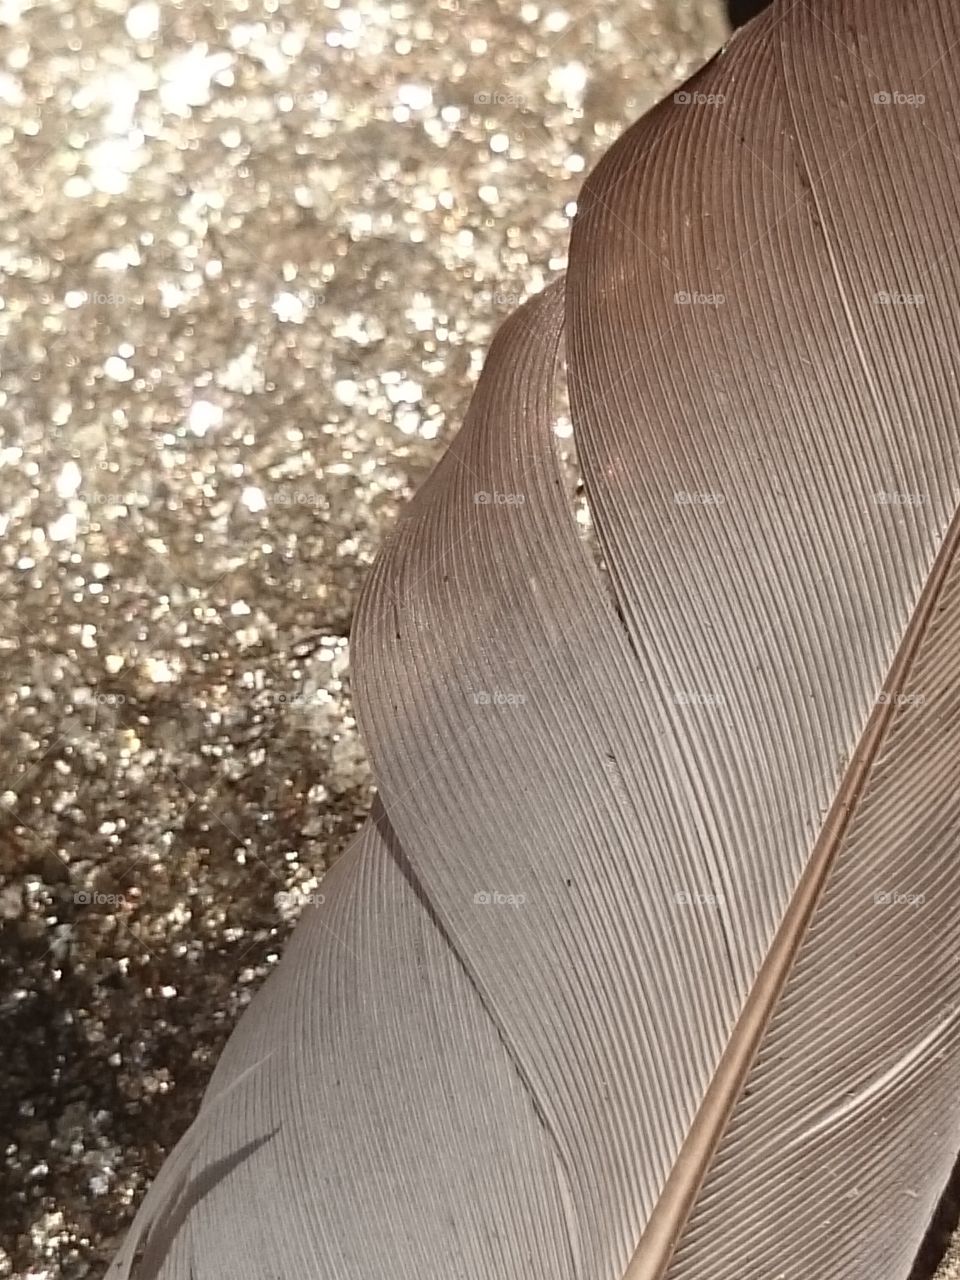 Feather on a glittery rock